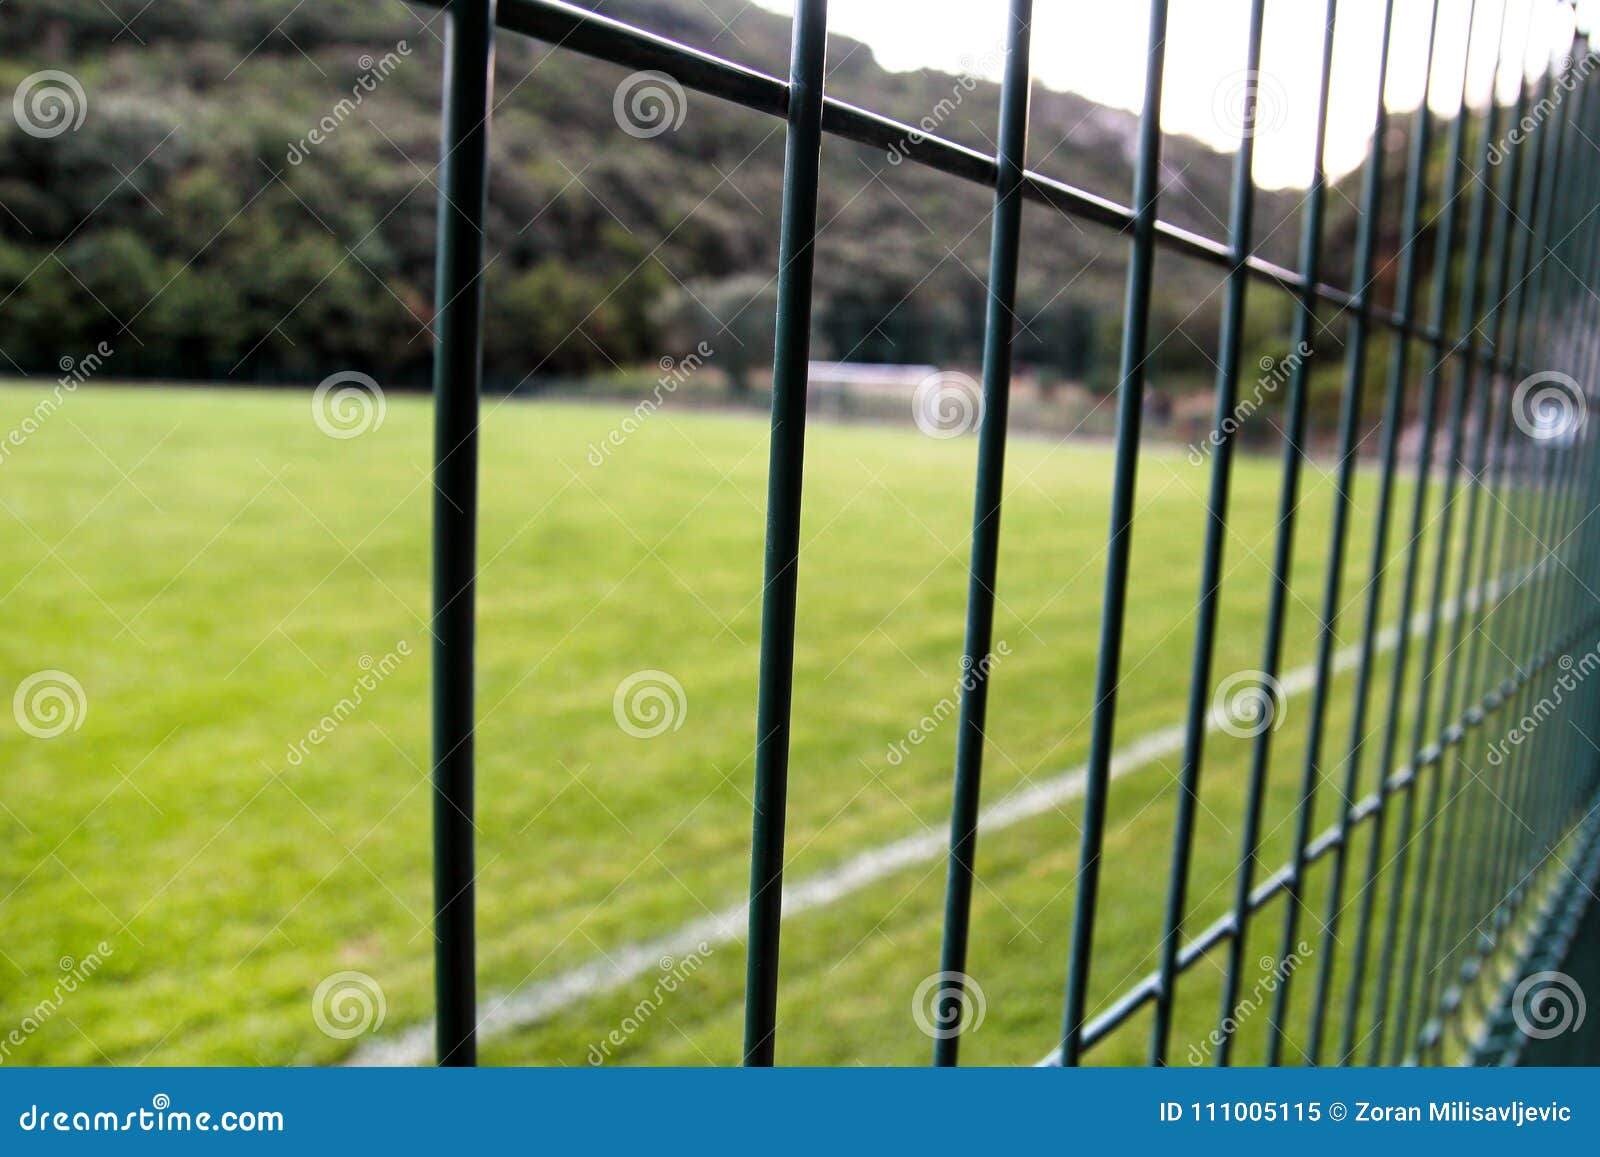 Detail Of A Soccer Field With White Line And Fence / Close Up Metallic ...
